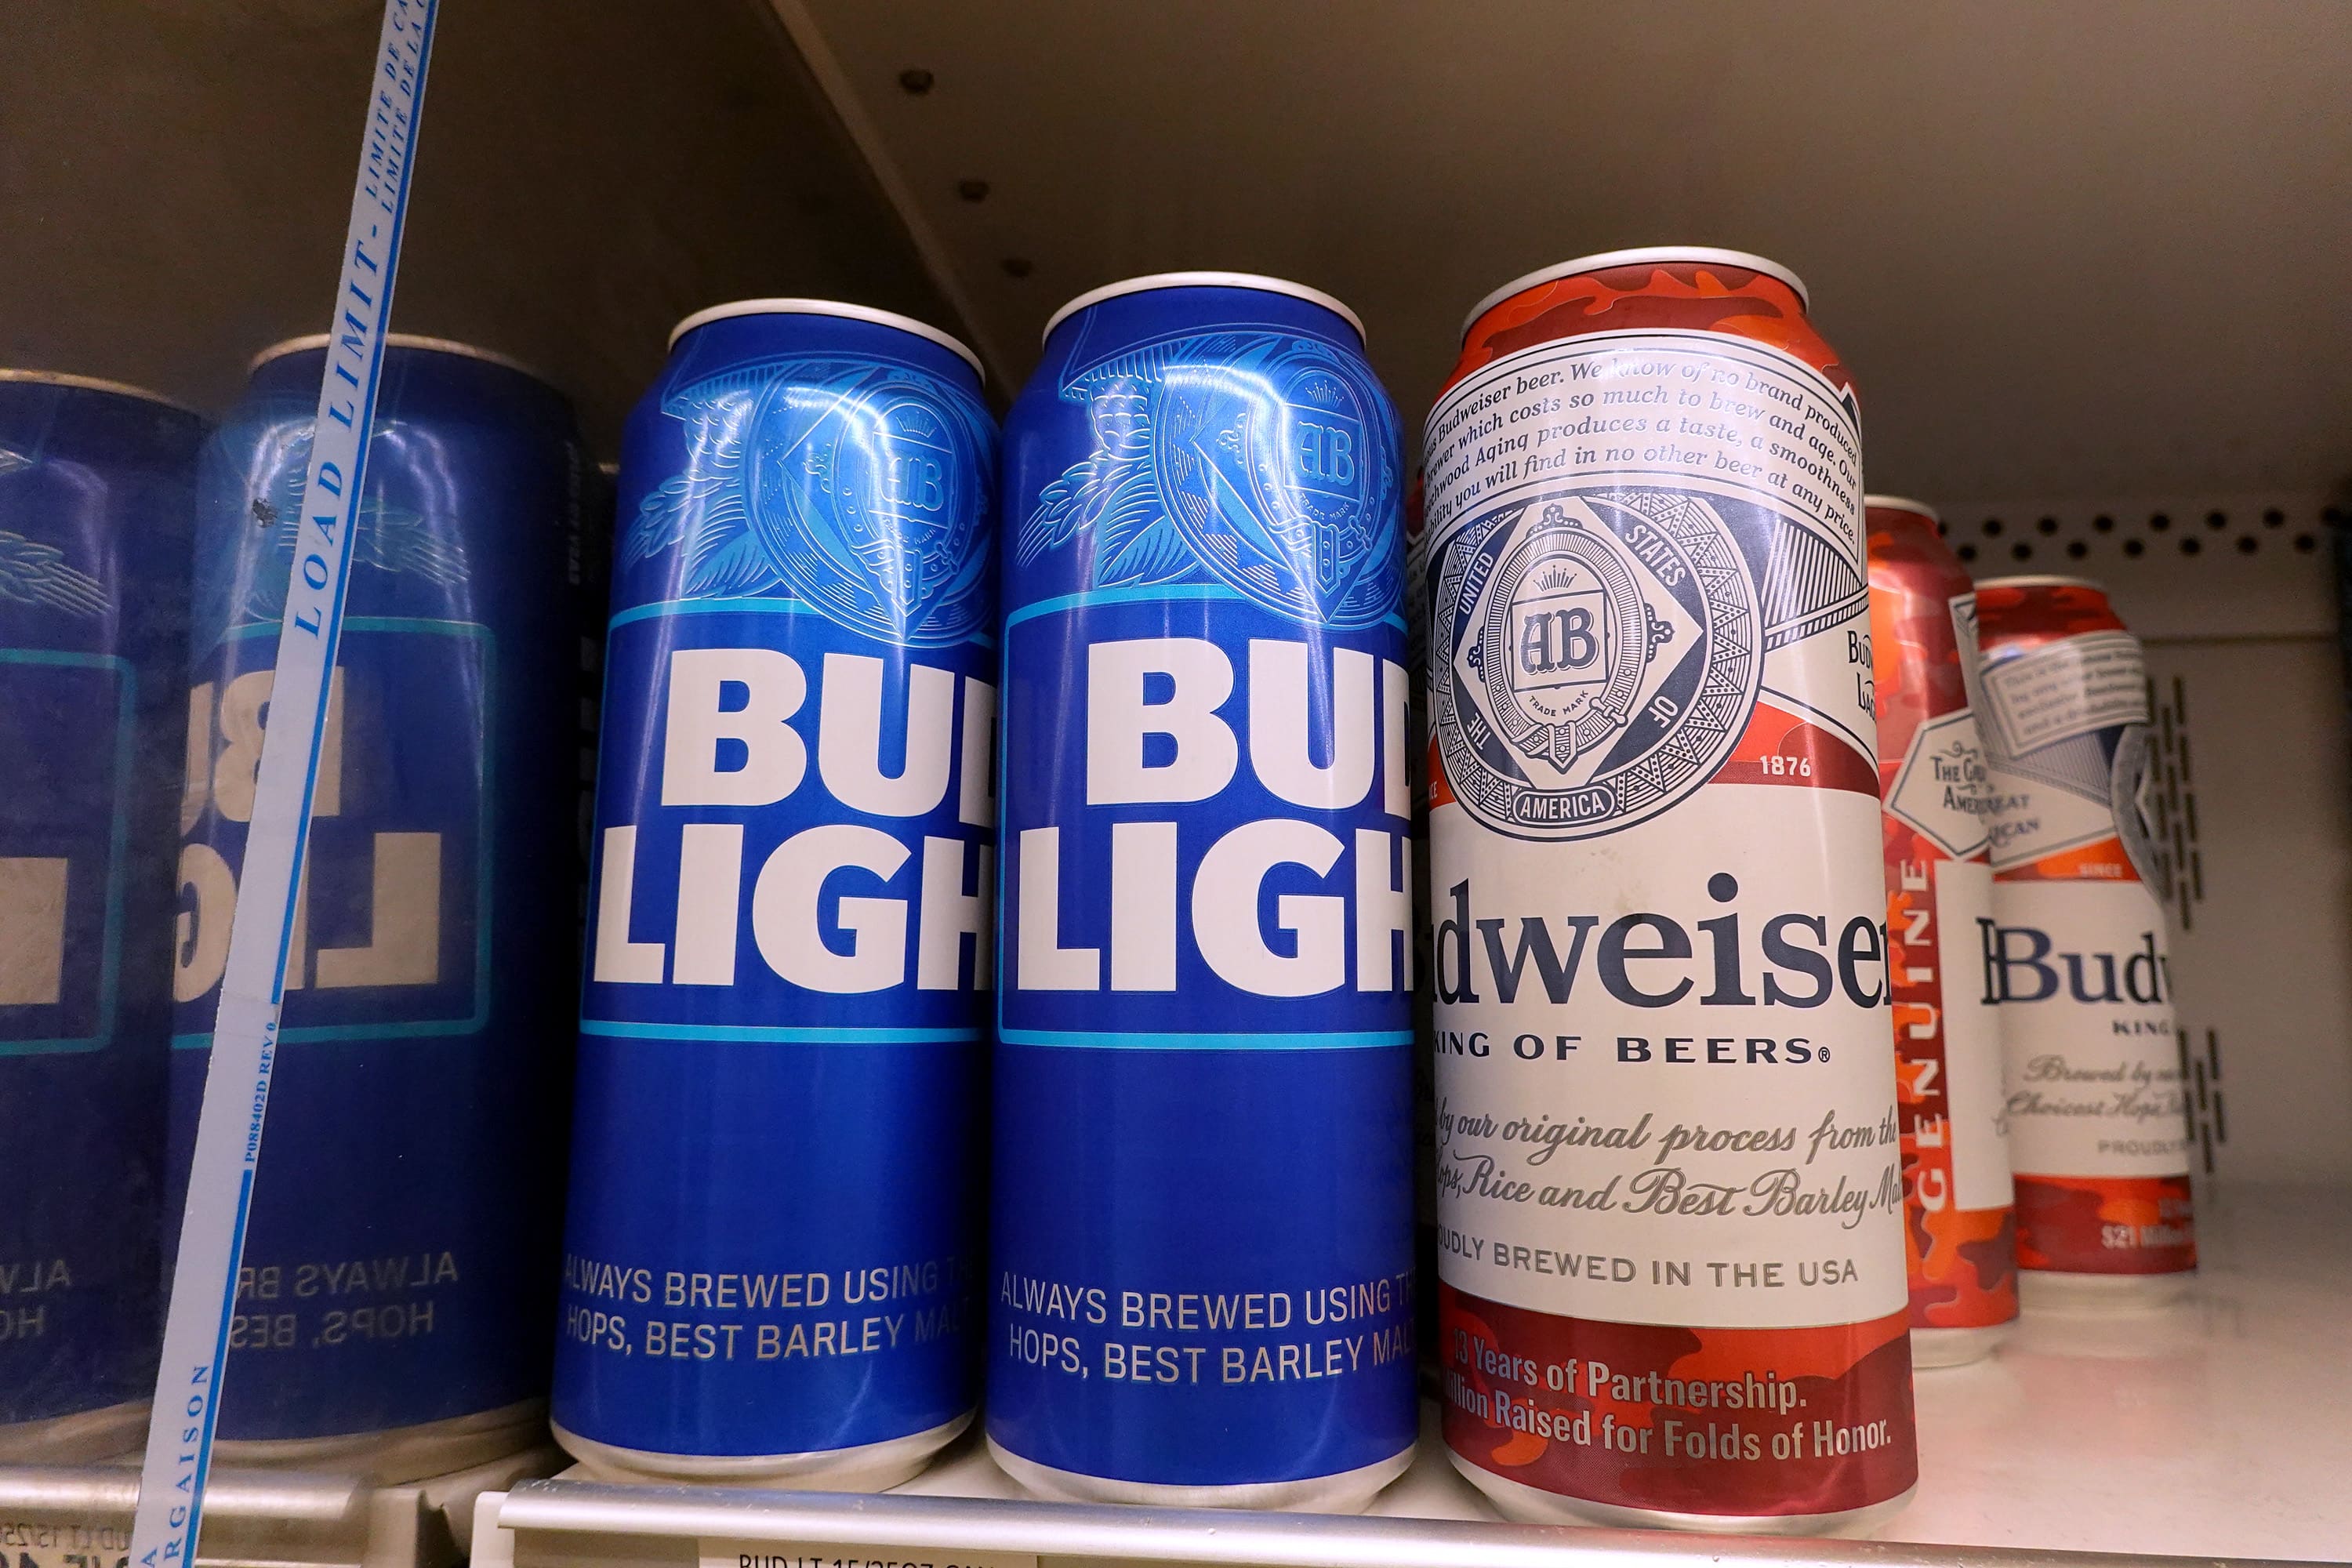 Beer giant AB InBev beat expectations, but Bud Light continues to decline